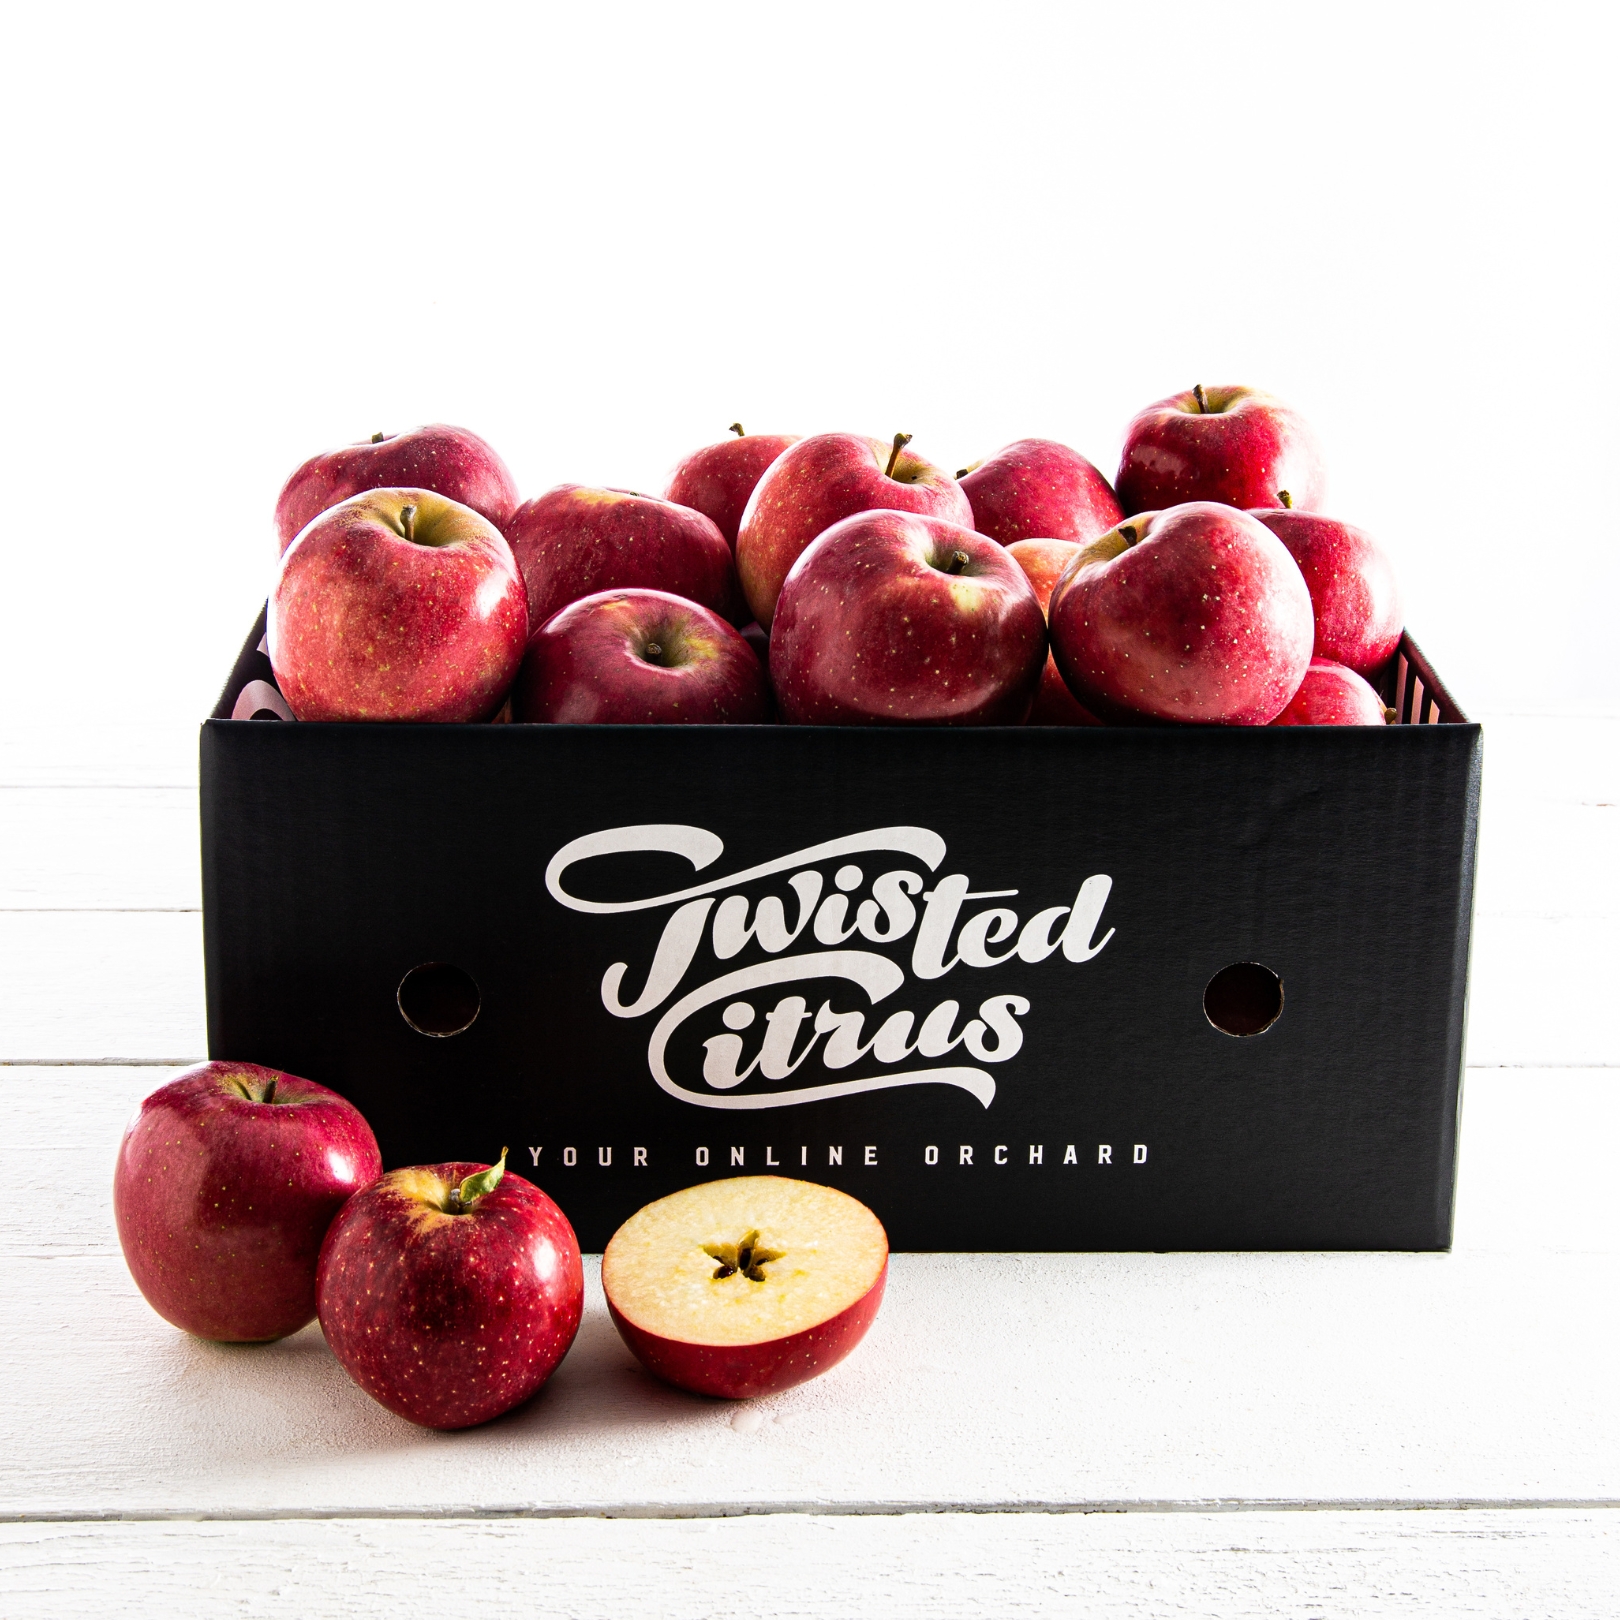 Buy Apples - Pacific Rose Online NZ - Twisted Citrus